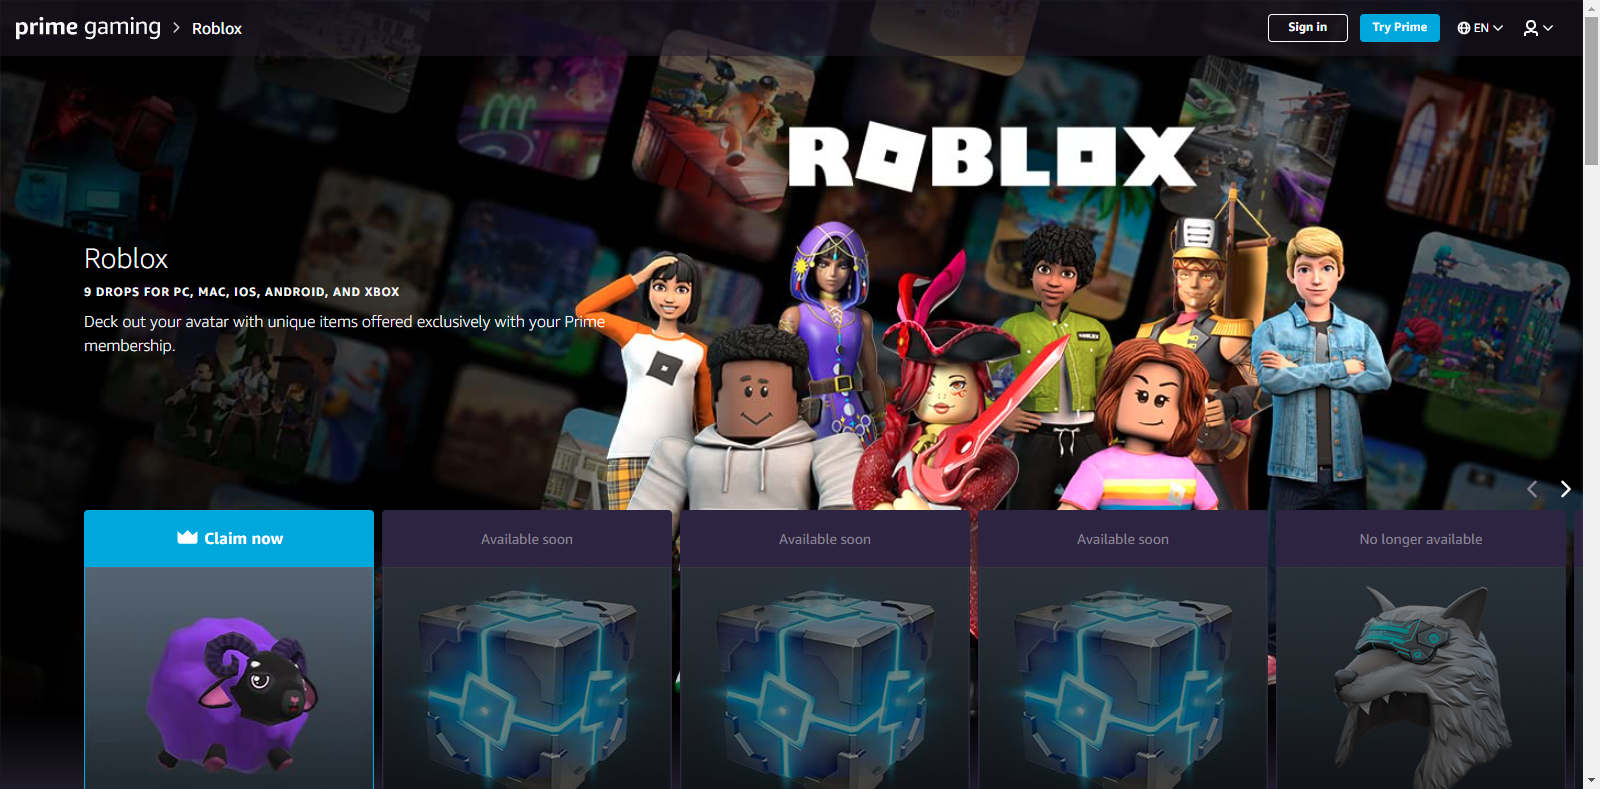 WANT FREE ROBLOX ITEMS? Deck out your avatar with unique items